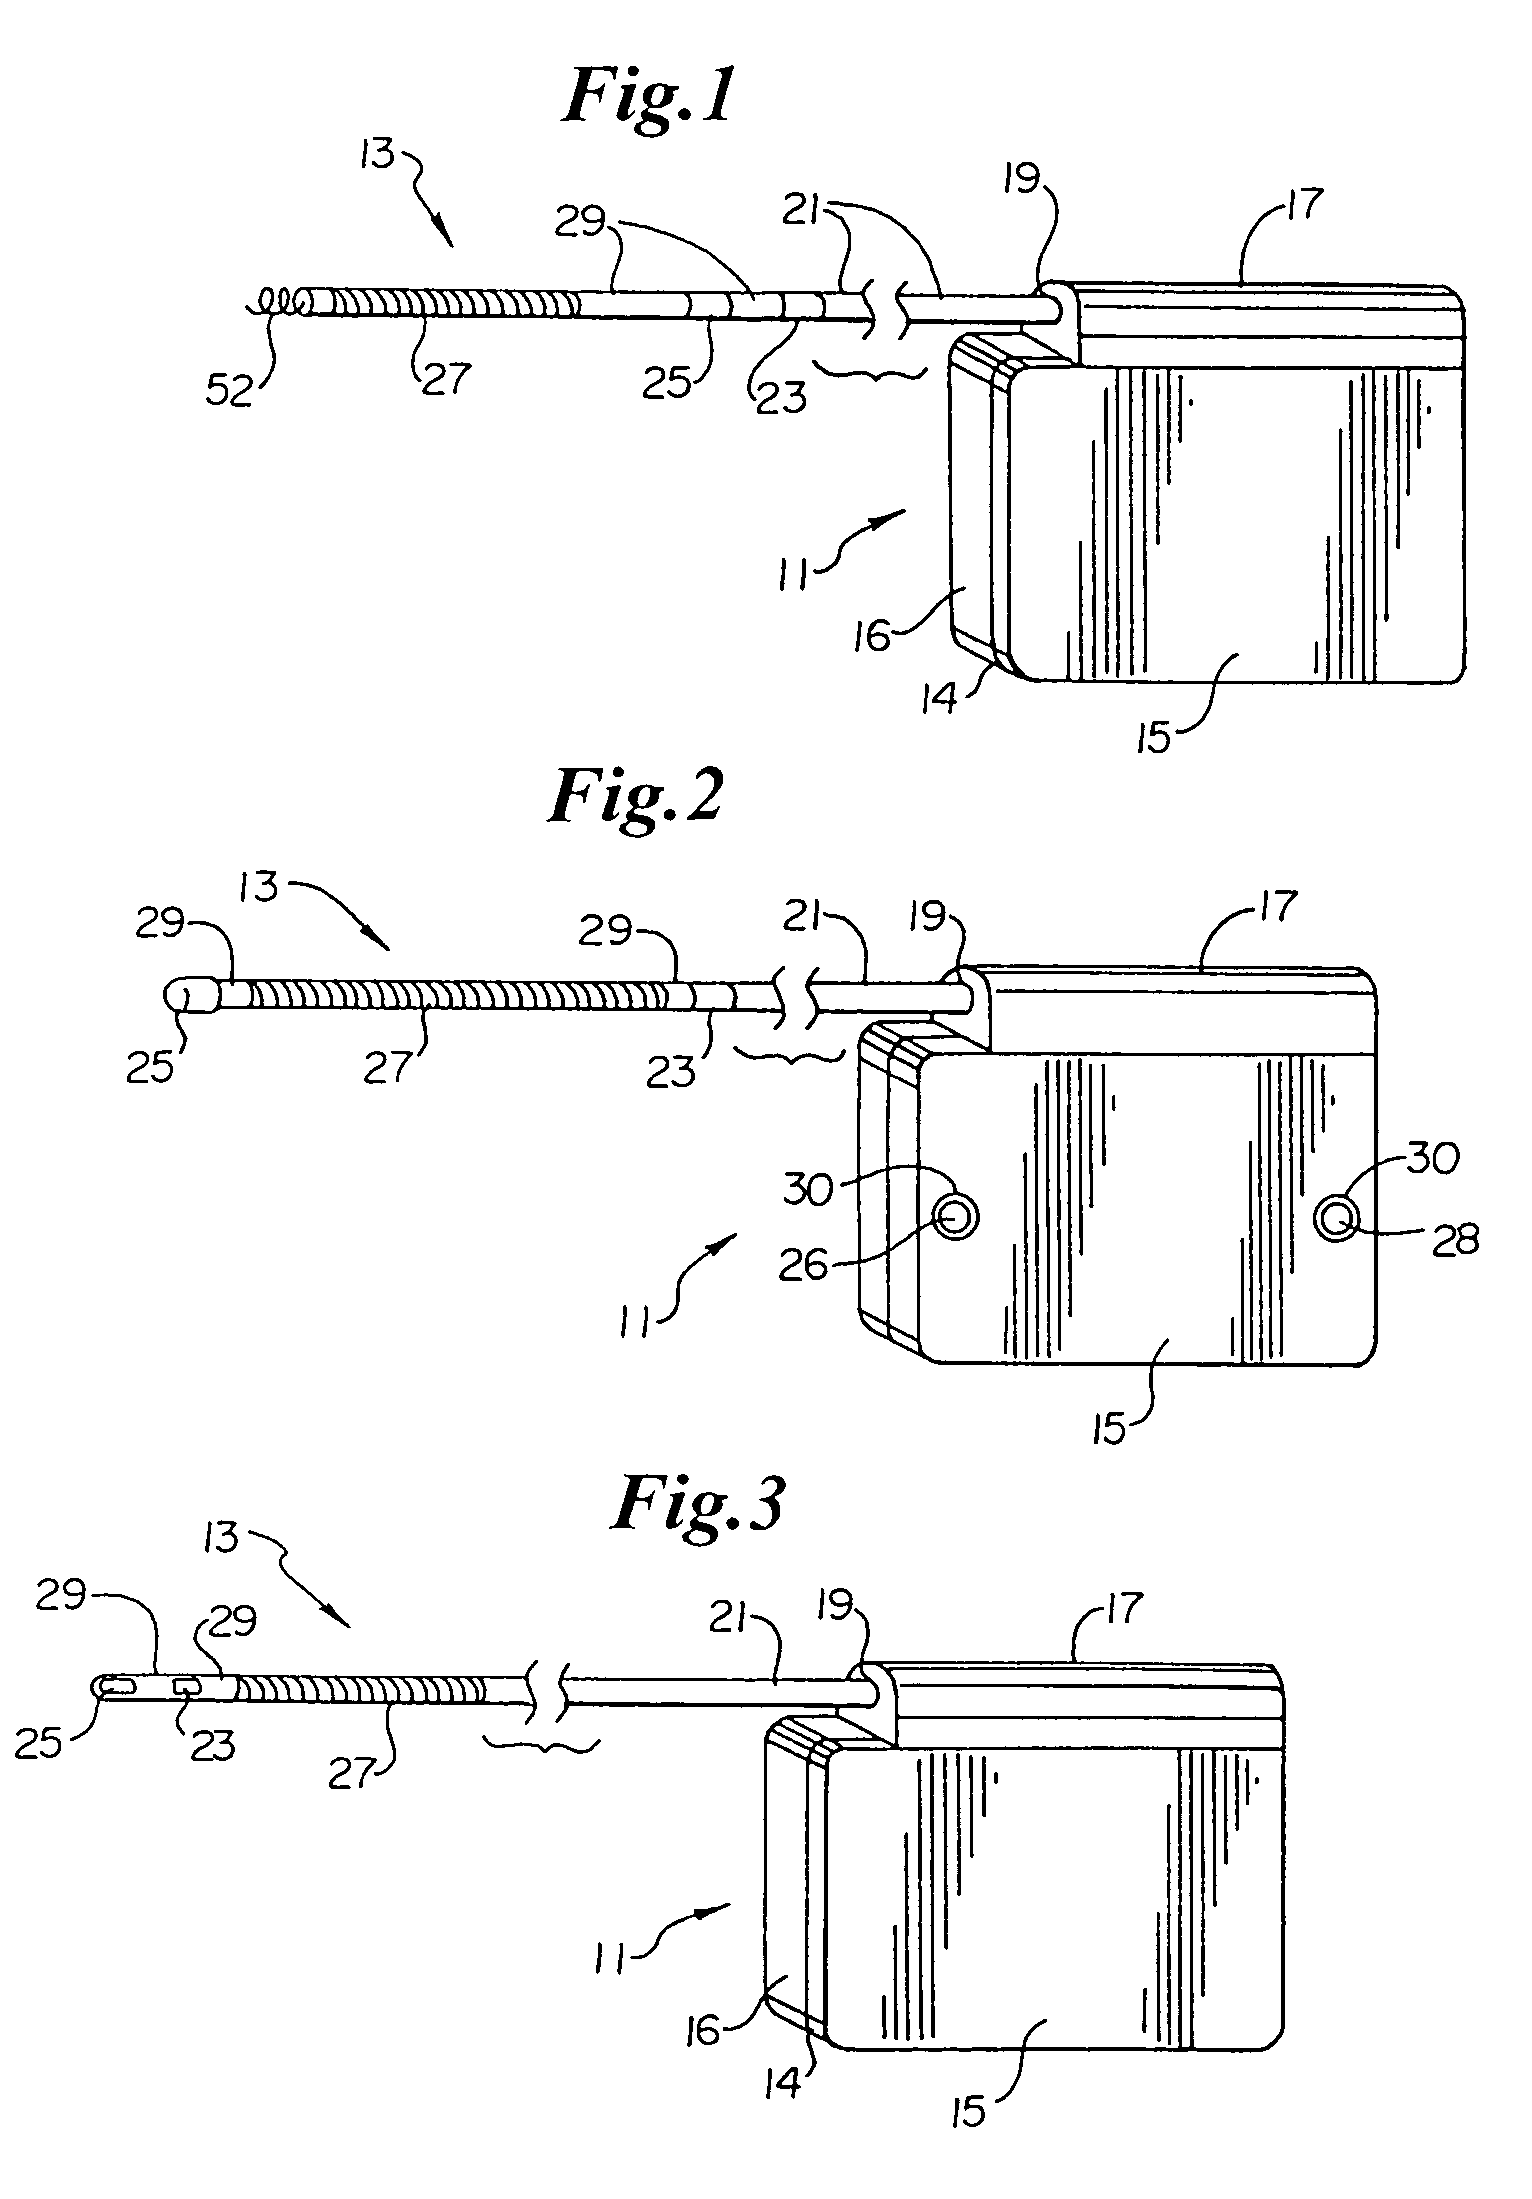 Duckbill-shaped implantable cardioverter-defibrillator canister and method of use